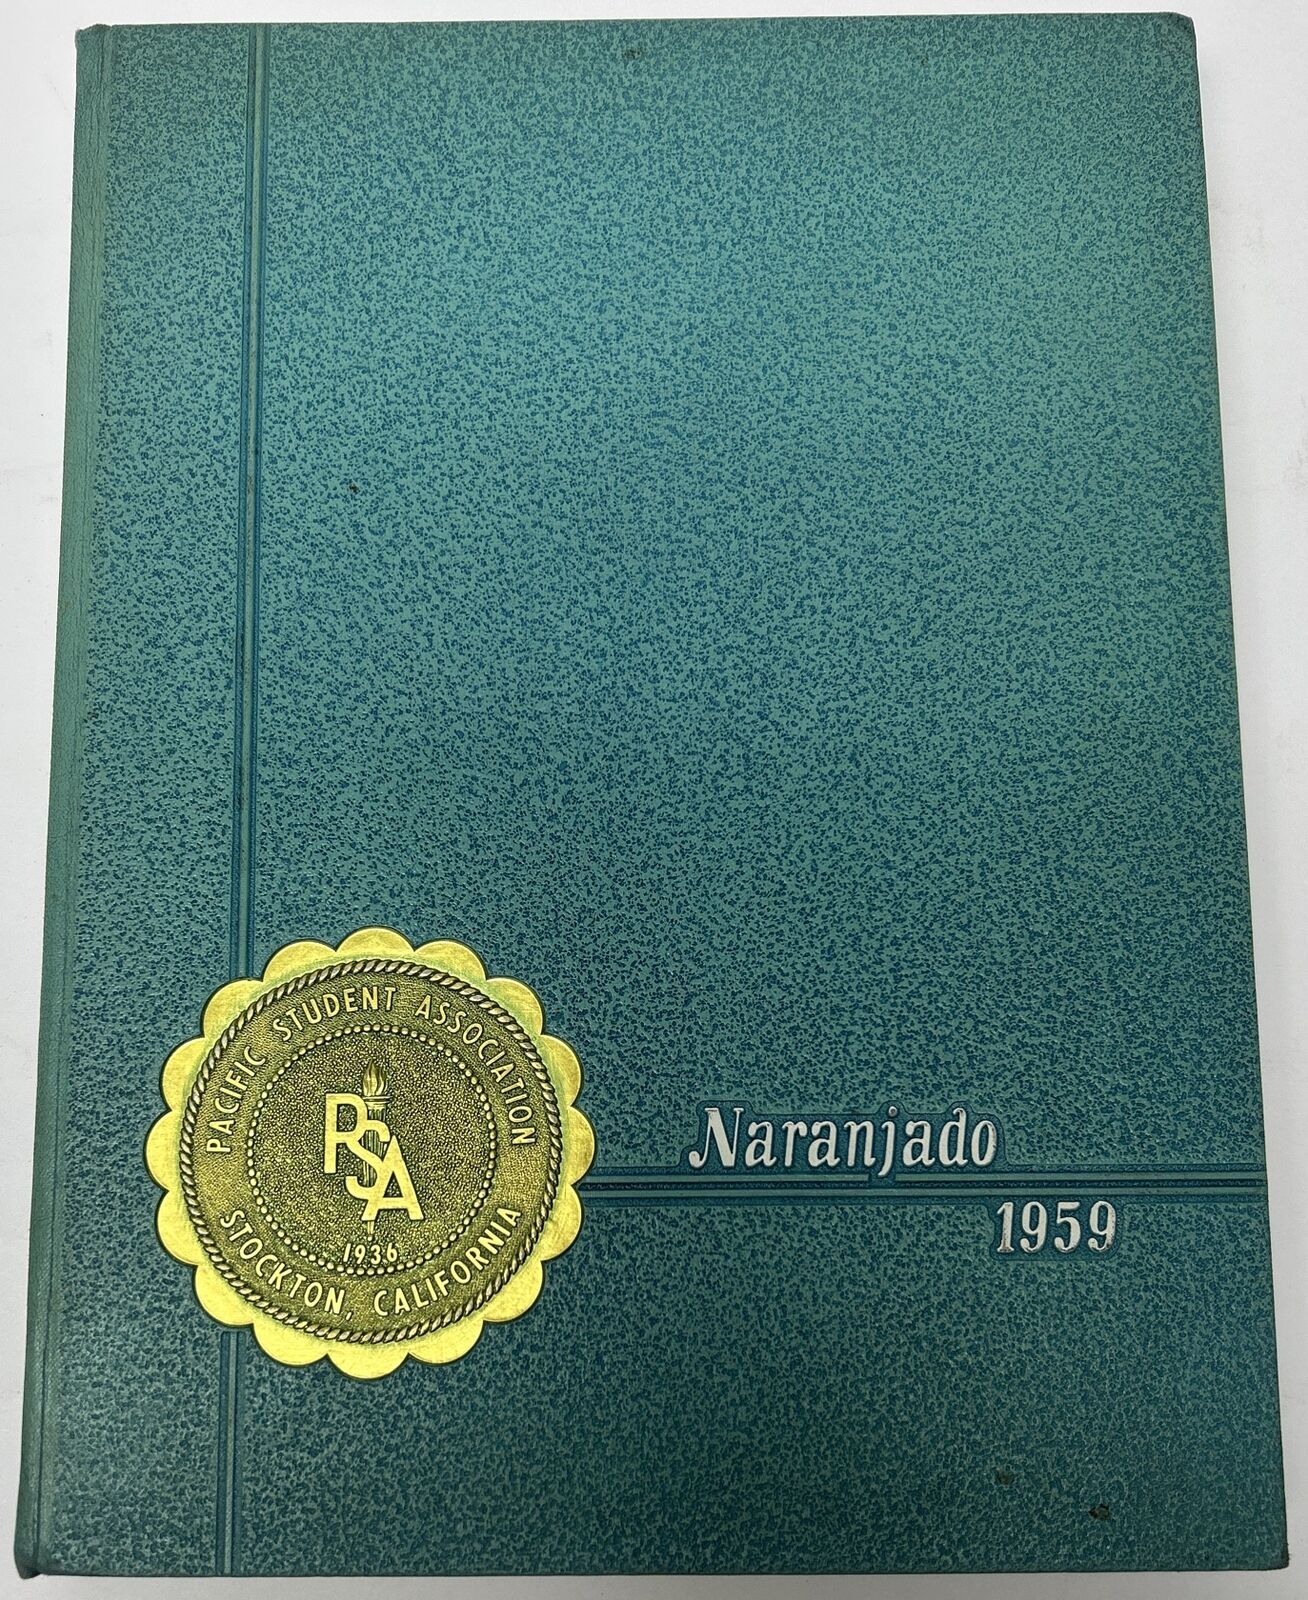 College of the Pacific 1959 Naranjado Pacific Student Assoc Hard Cover Yearbook